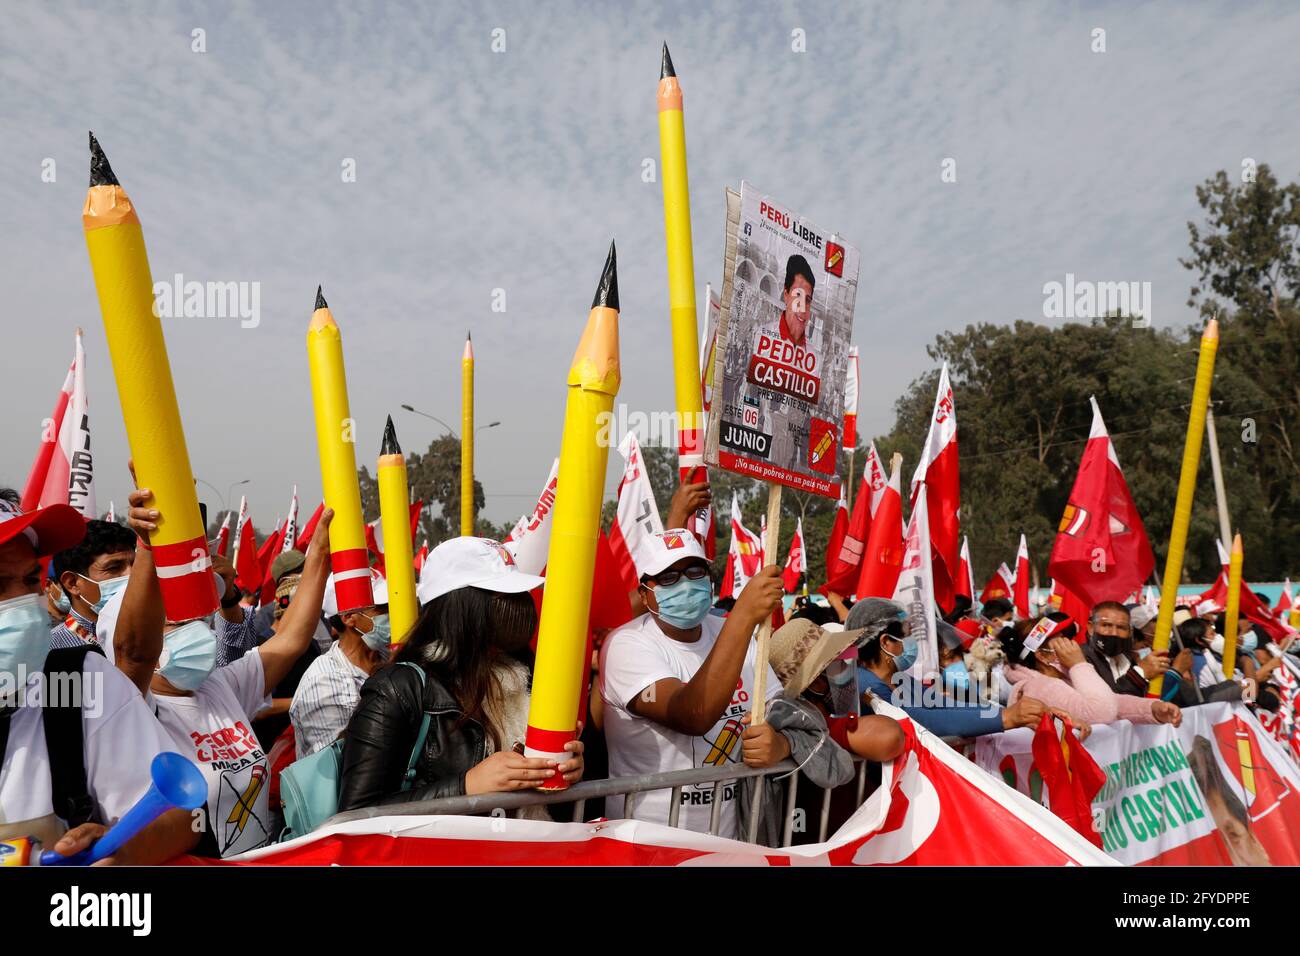 Lima, Peru. 26th May, 2021. People holding pencils, the symbol of the party, attend a campaign rally for Presidential candidate Pedro Castillo, in Villa El Salvador neighborhood. On June 6 Peruvians will go to the polls to elect new President between Castillo and Keiko Fujimori. Credit: Mariana Bazo/ZUMA Wire/Alamy Live News Stock Photo